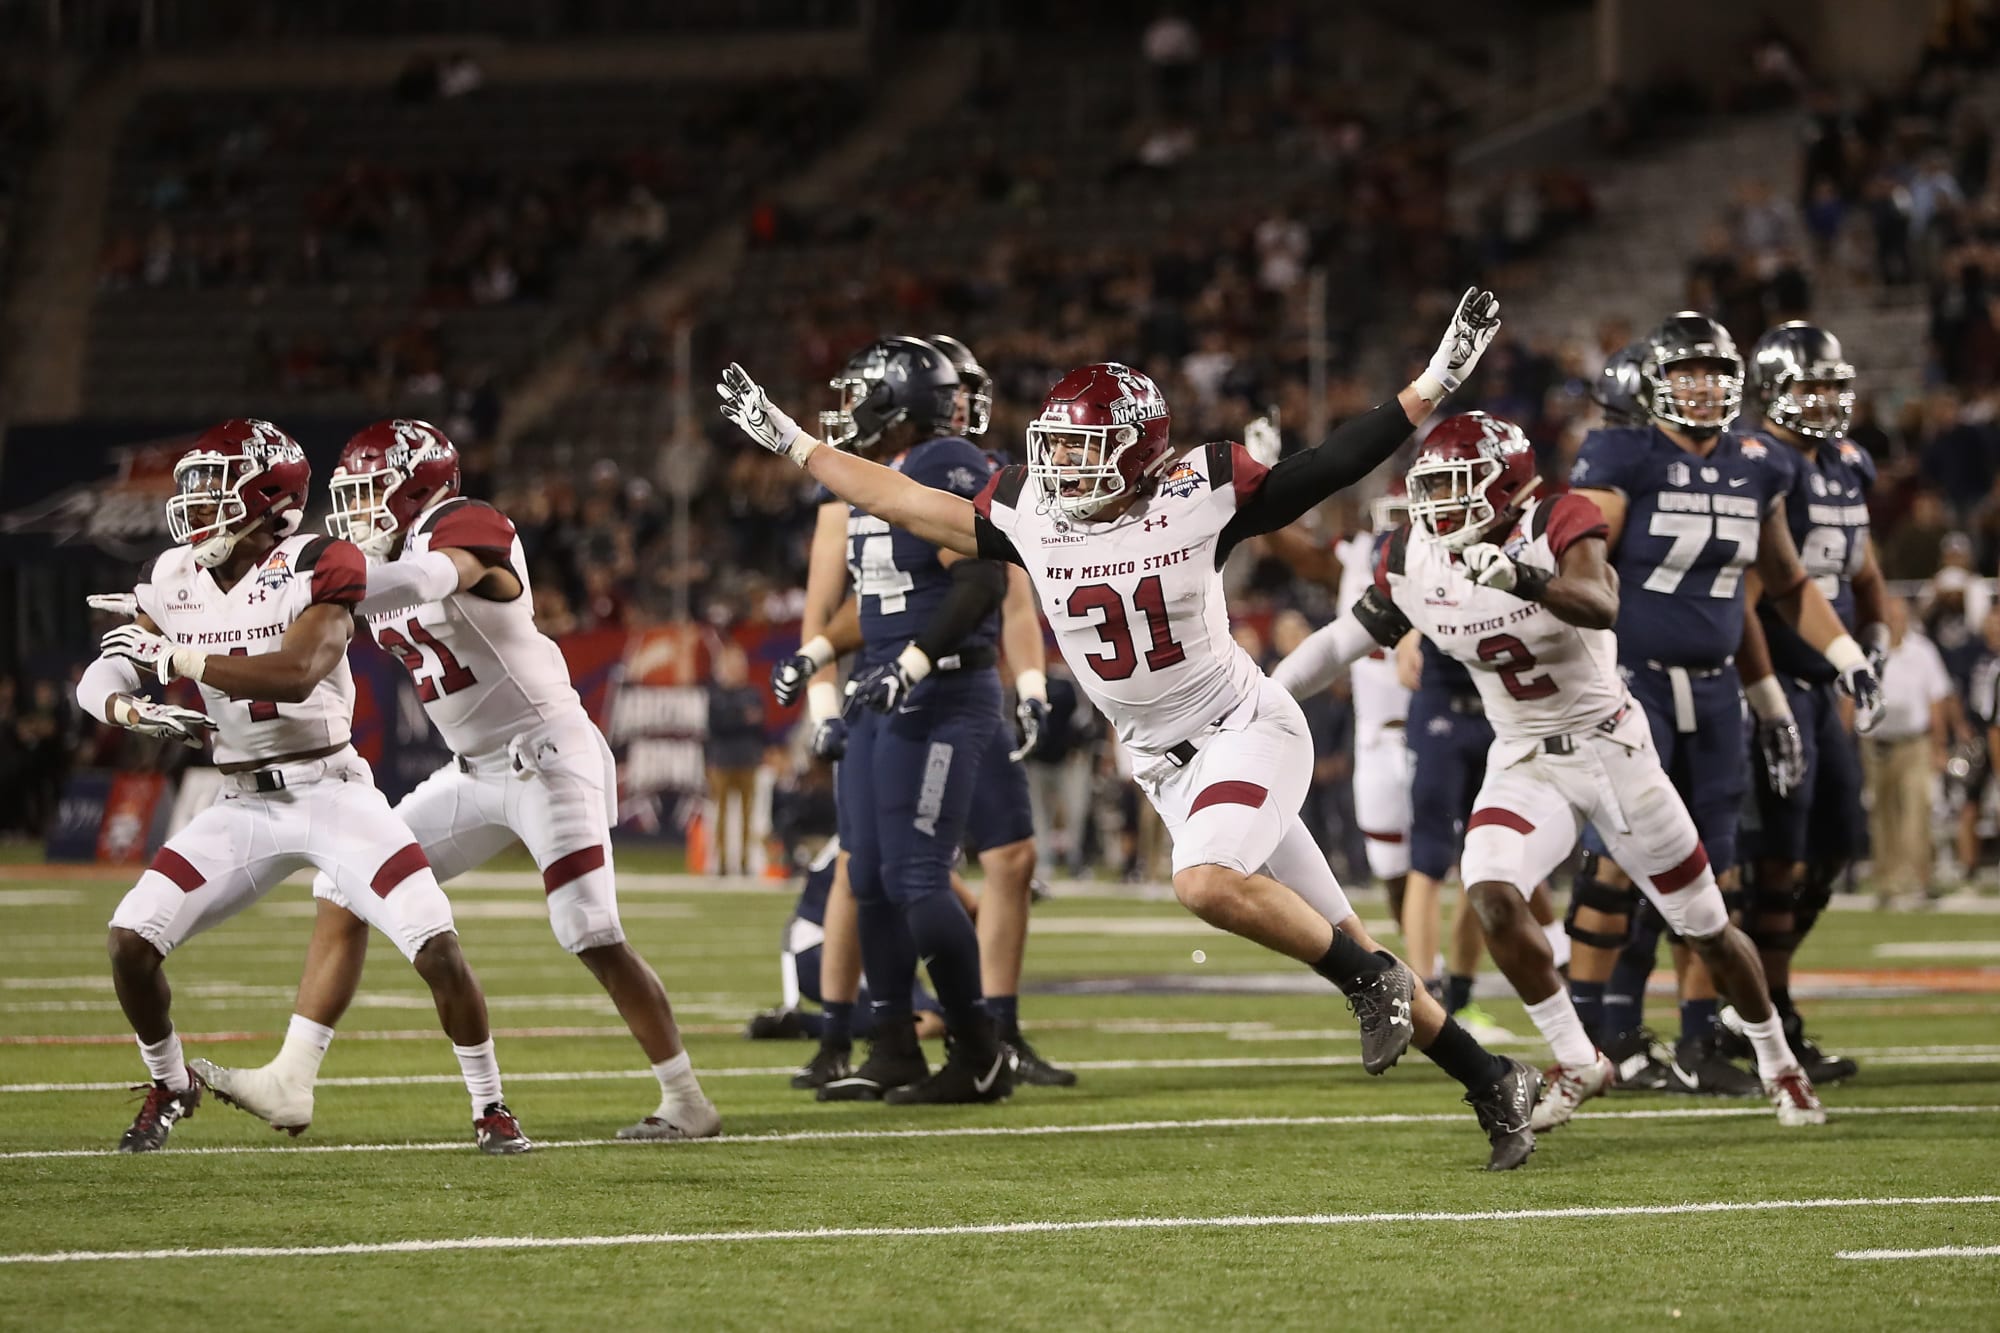 New Mexico State football wins first bowl game in 57 years